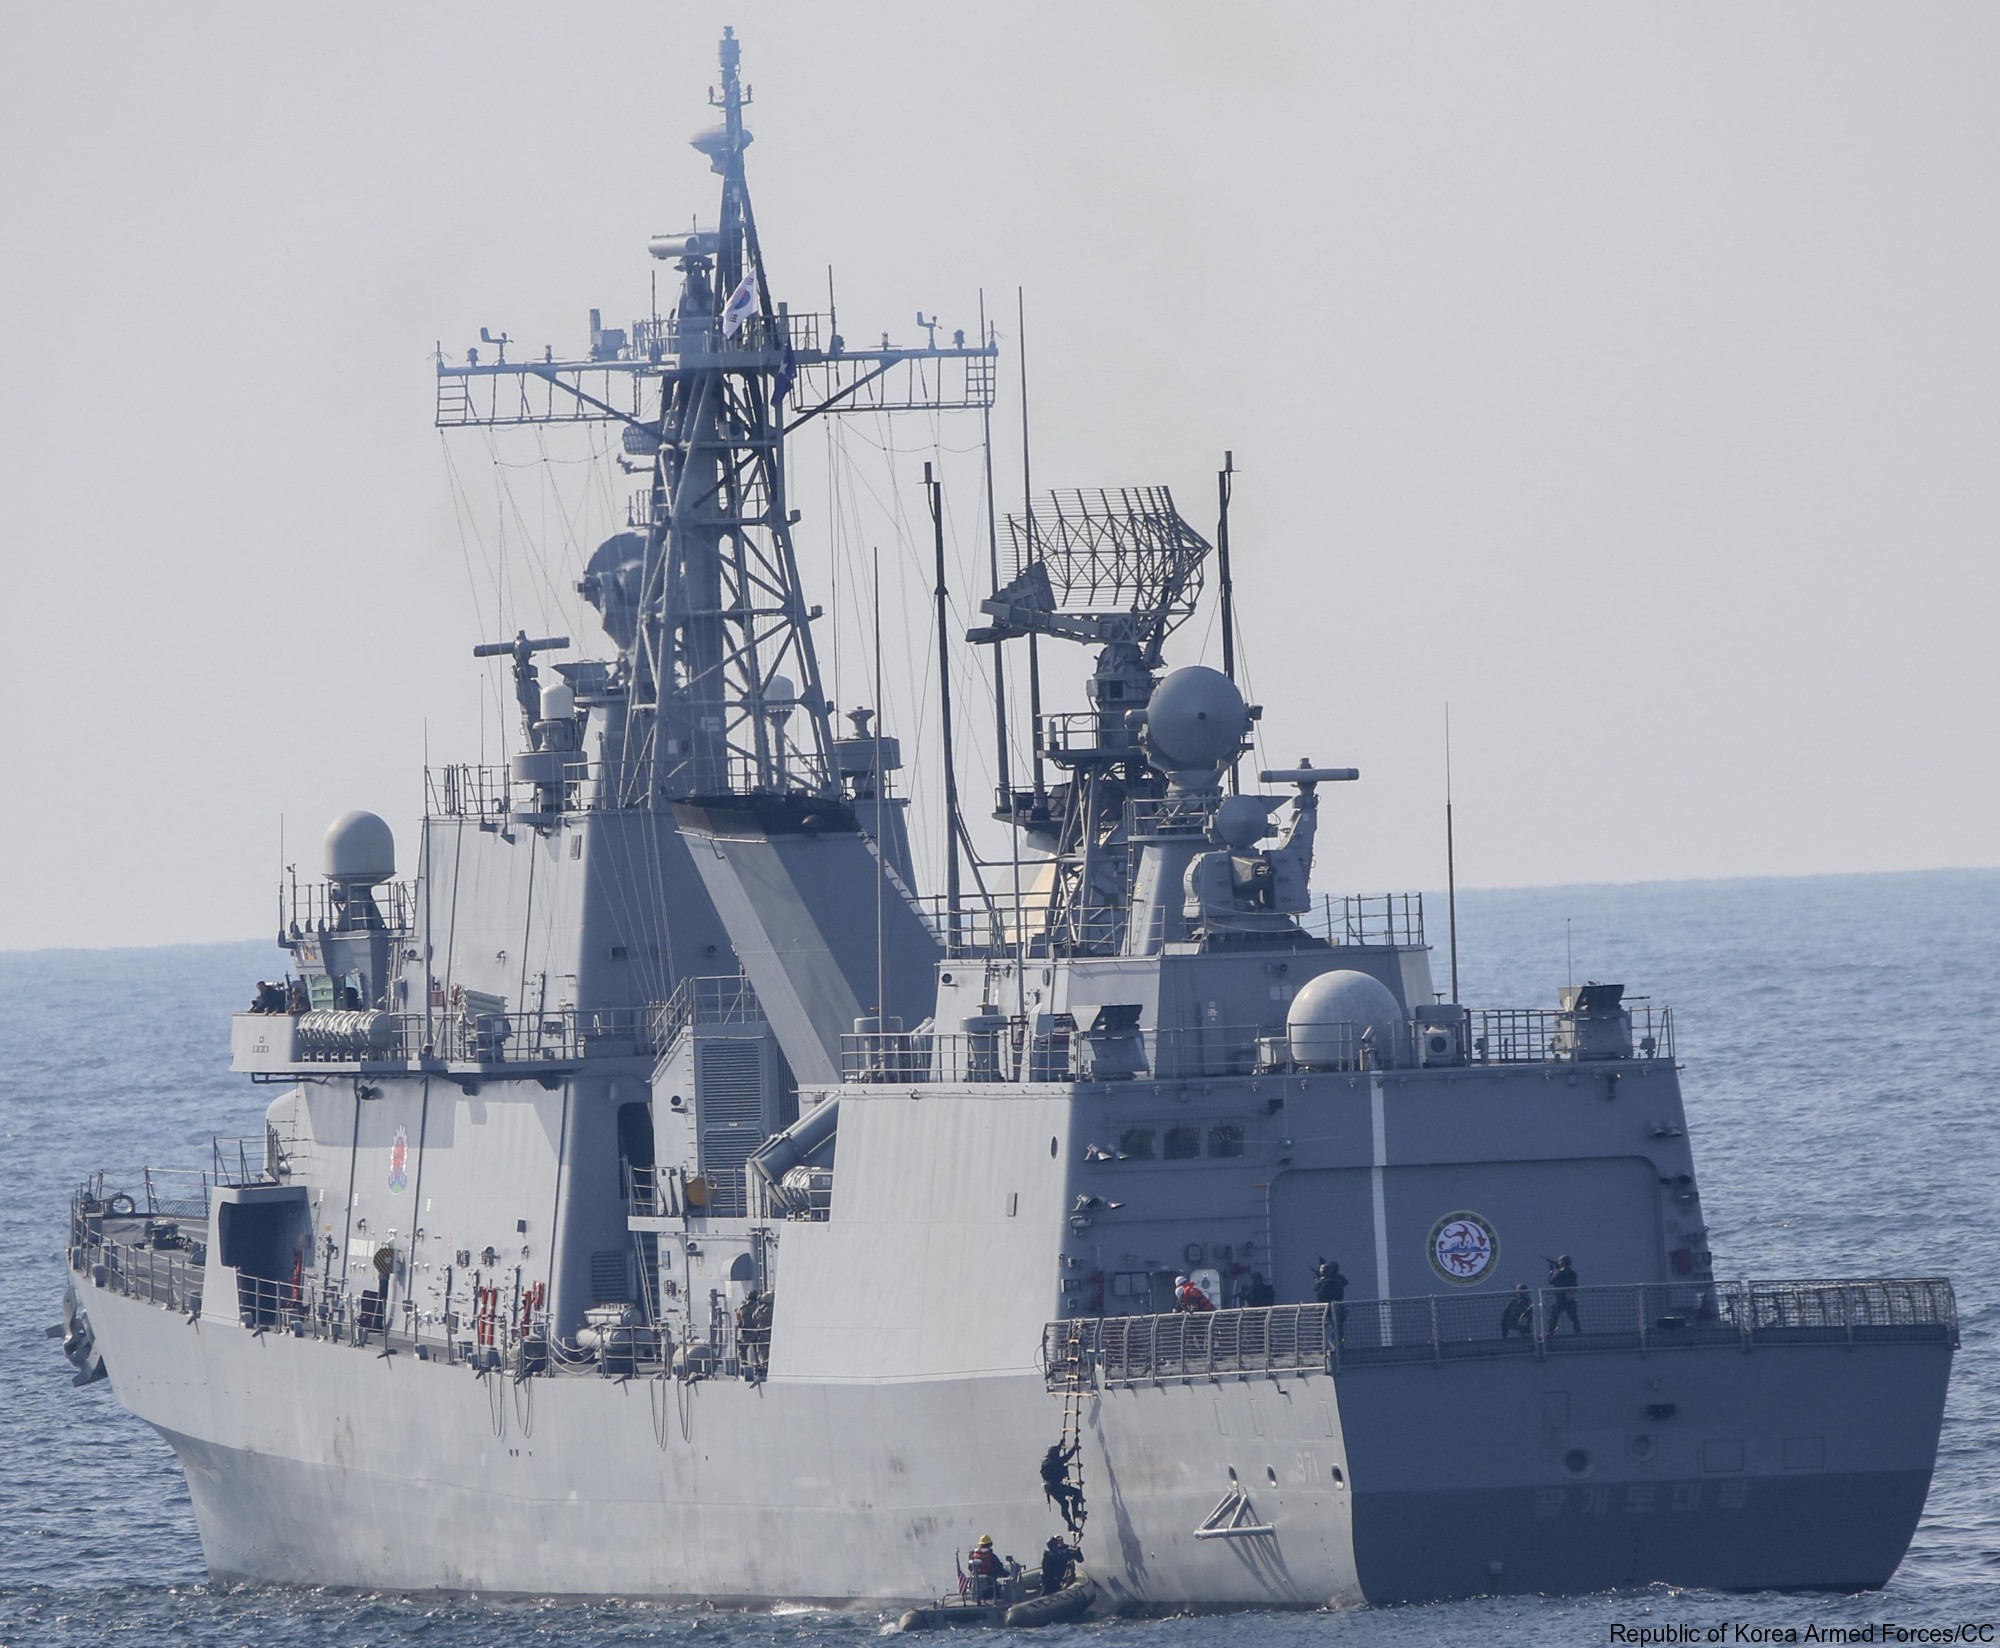 ddh-971 roks gwanggaeto the great destroyer republic of korea navy rokn sea sparrow missile helicopter 03